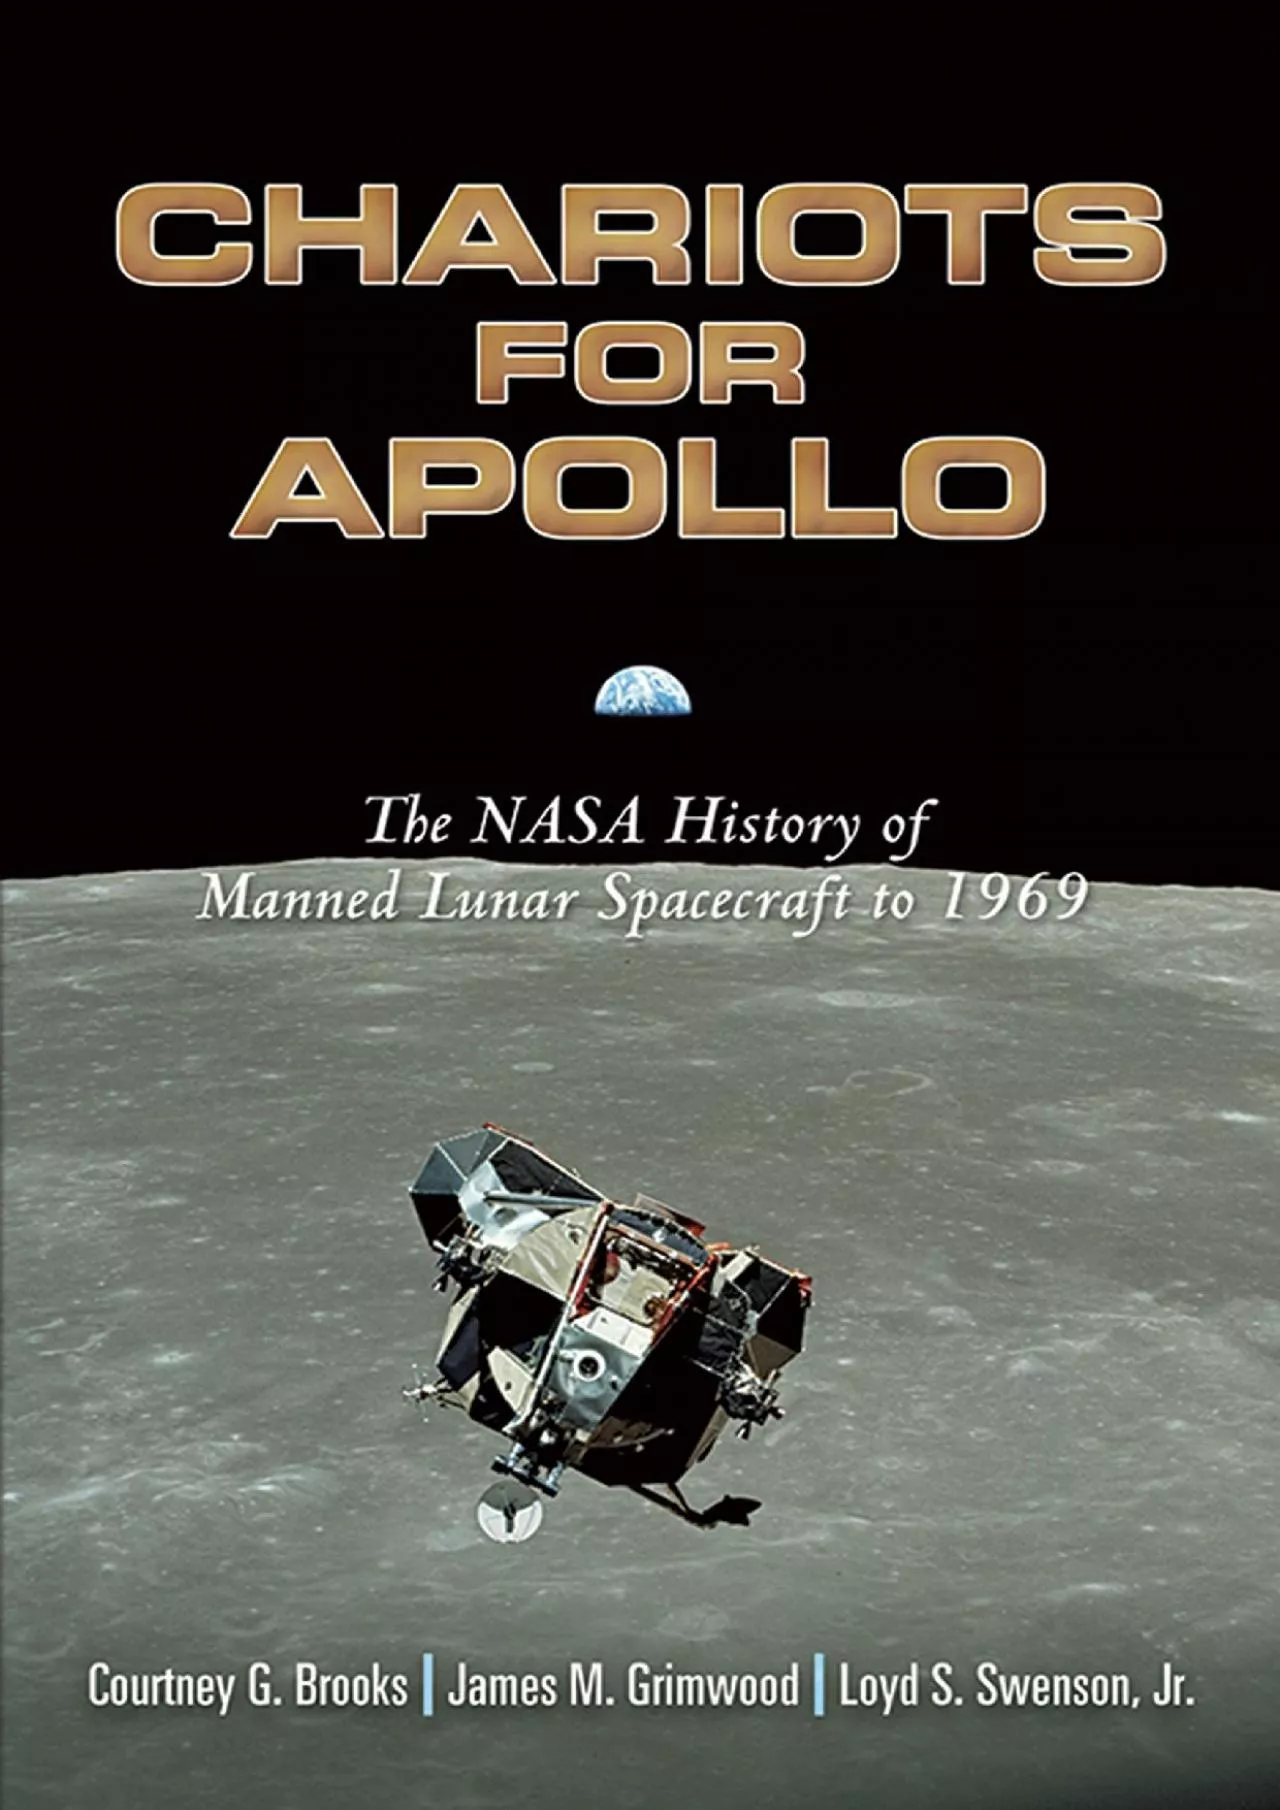 (BOOS)-Chariots for Apollo: The NASA History of Manned Lunar Spacecraft to 1969 (Dover